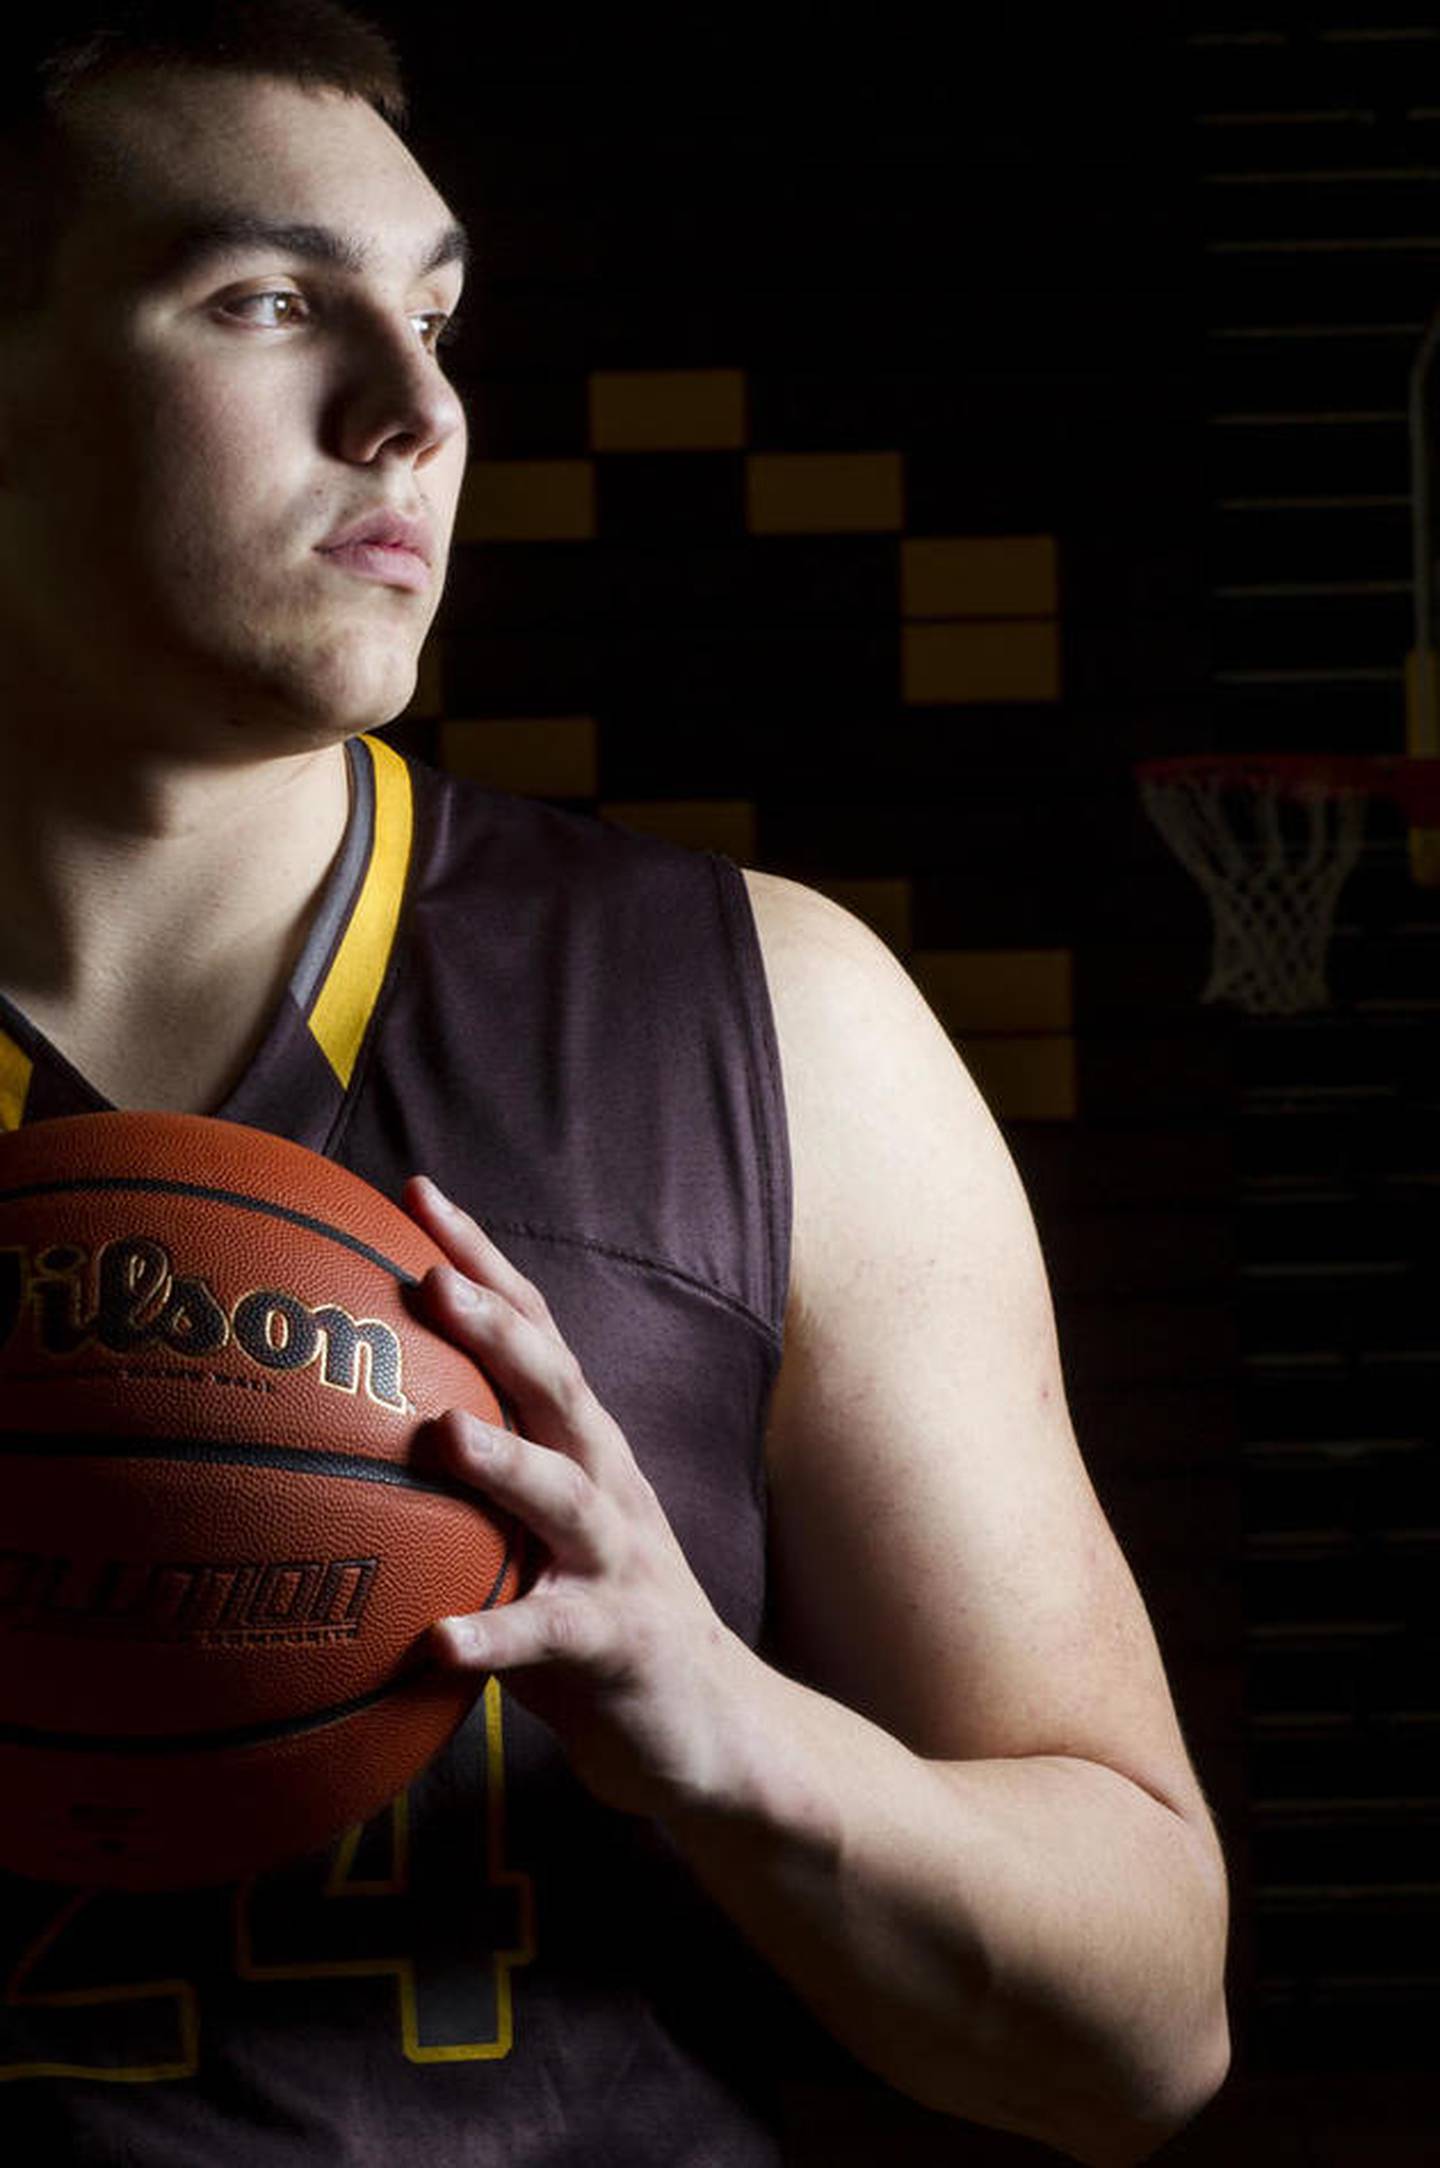 Jacobs' Cameron Krutwig is the 2017 Northwest Herald Basketball Player of the Year.